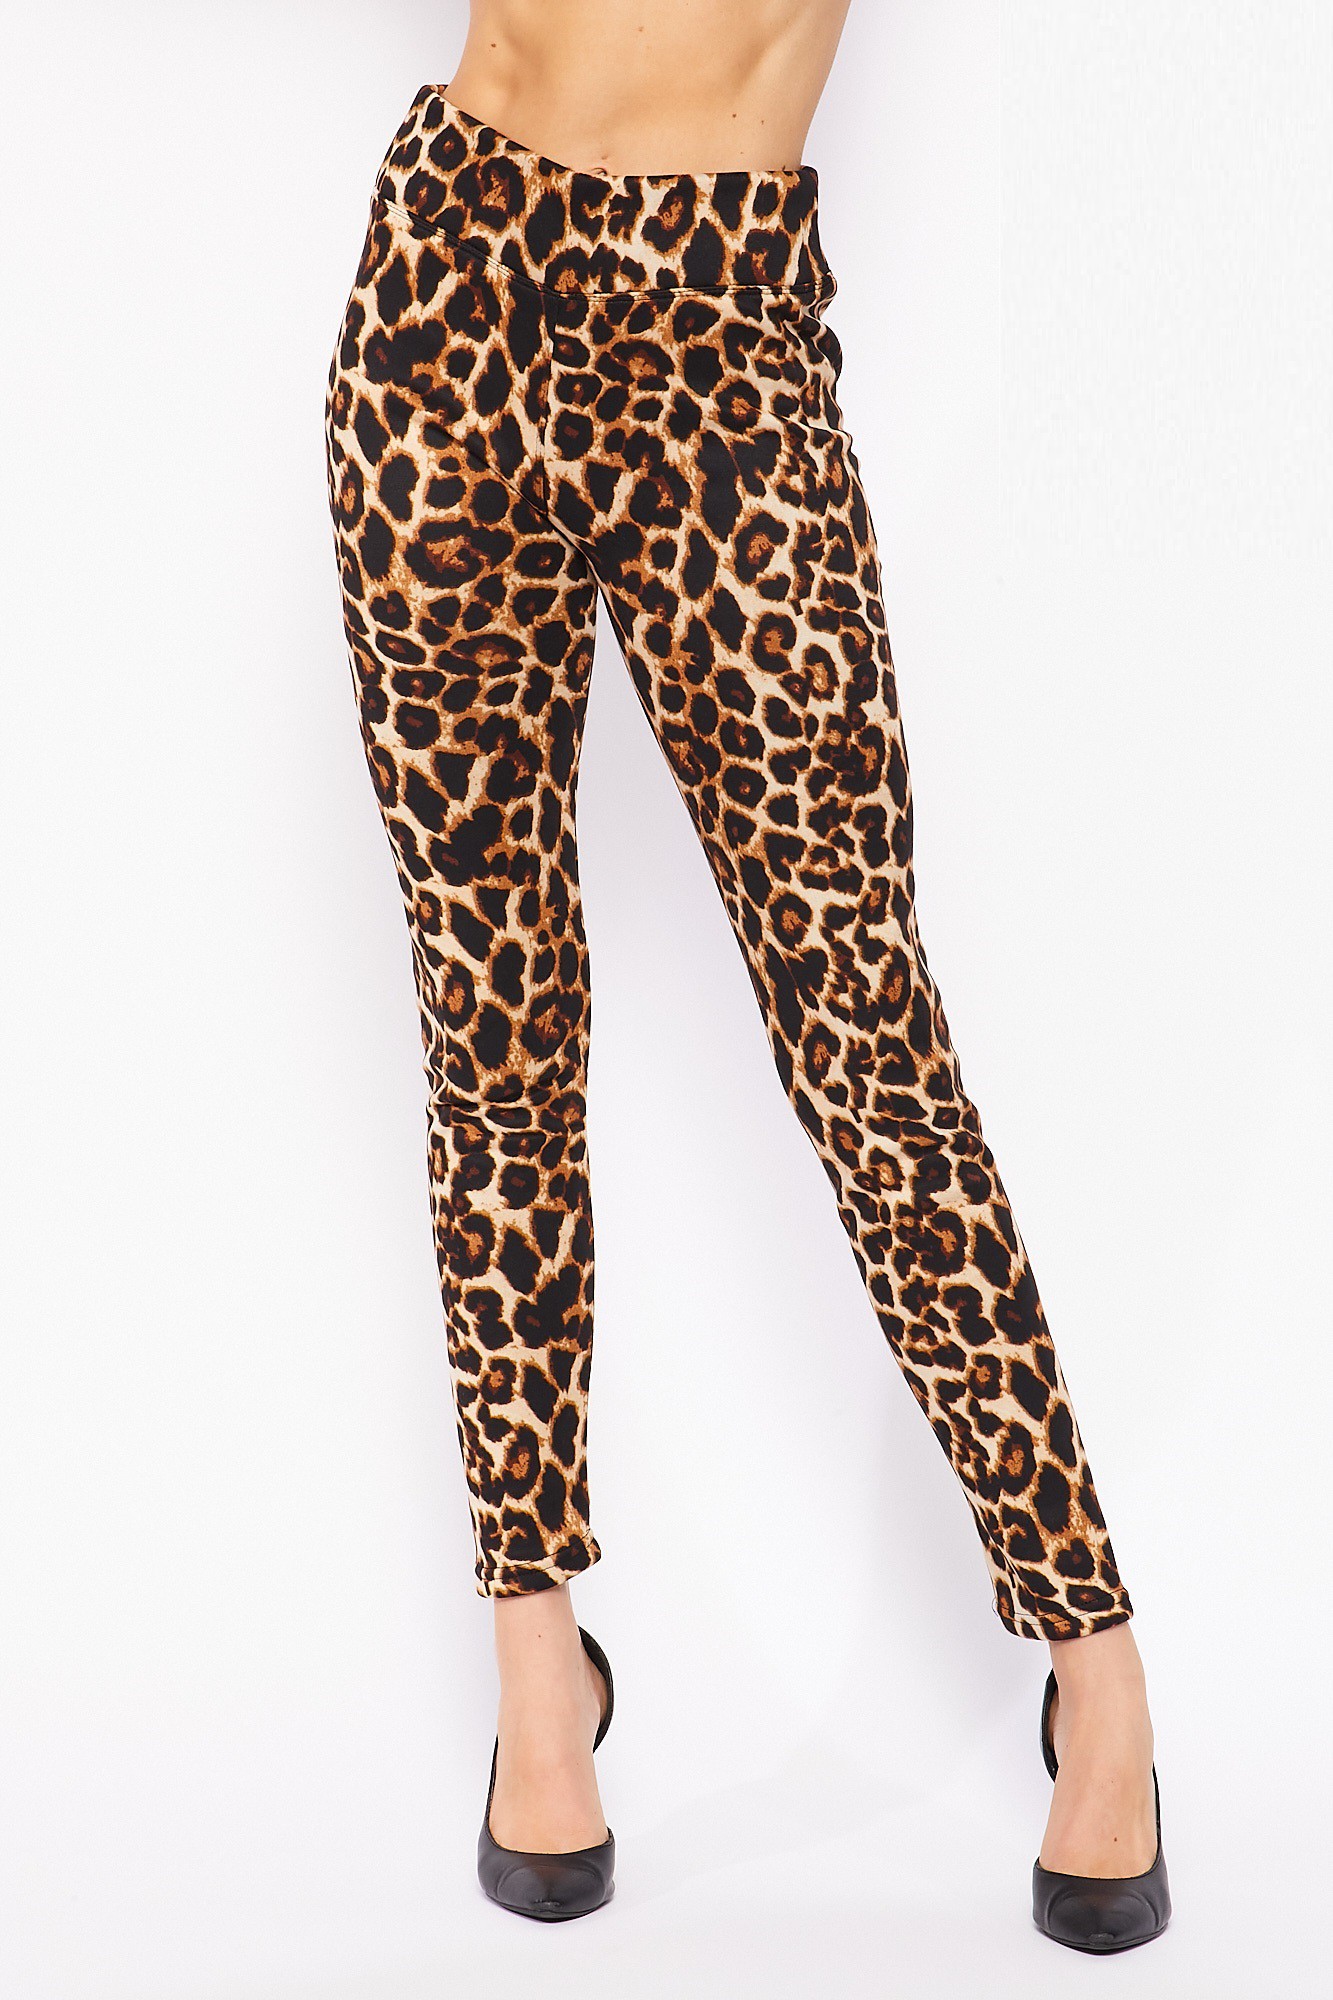 Wholesale Buttery Smooth Bold and Beautiful High Waist Leopard Leggings - 3 Inch Waist